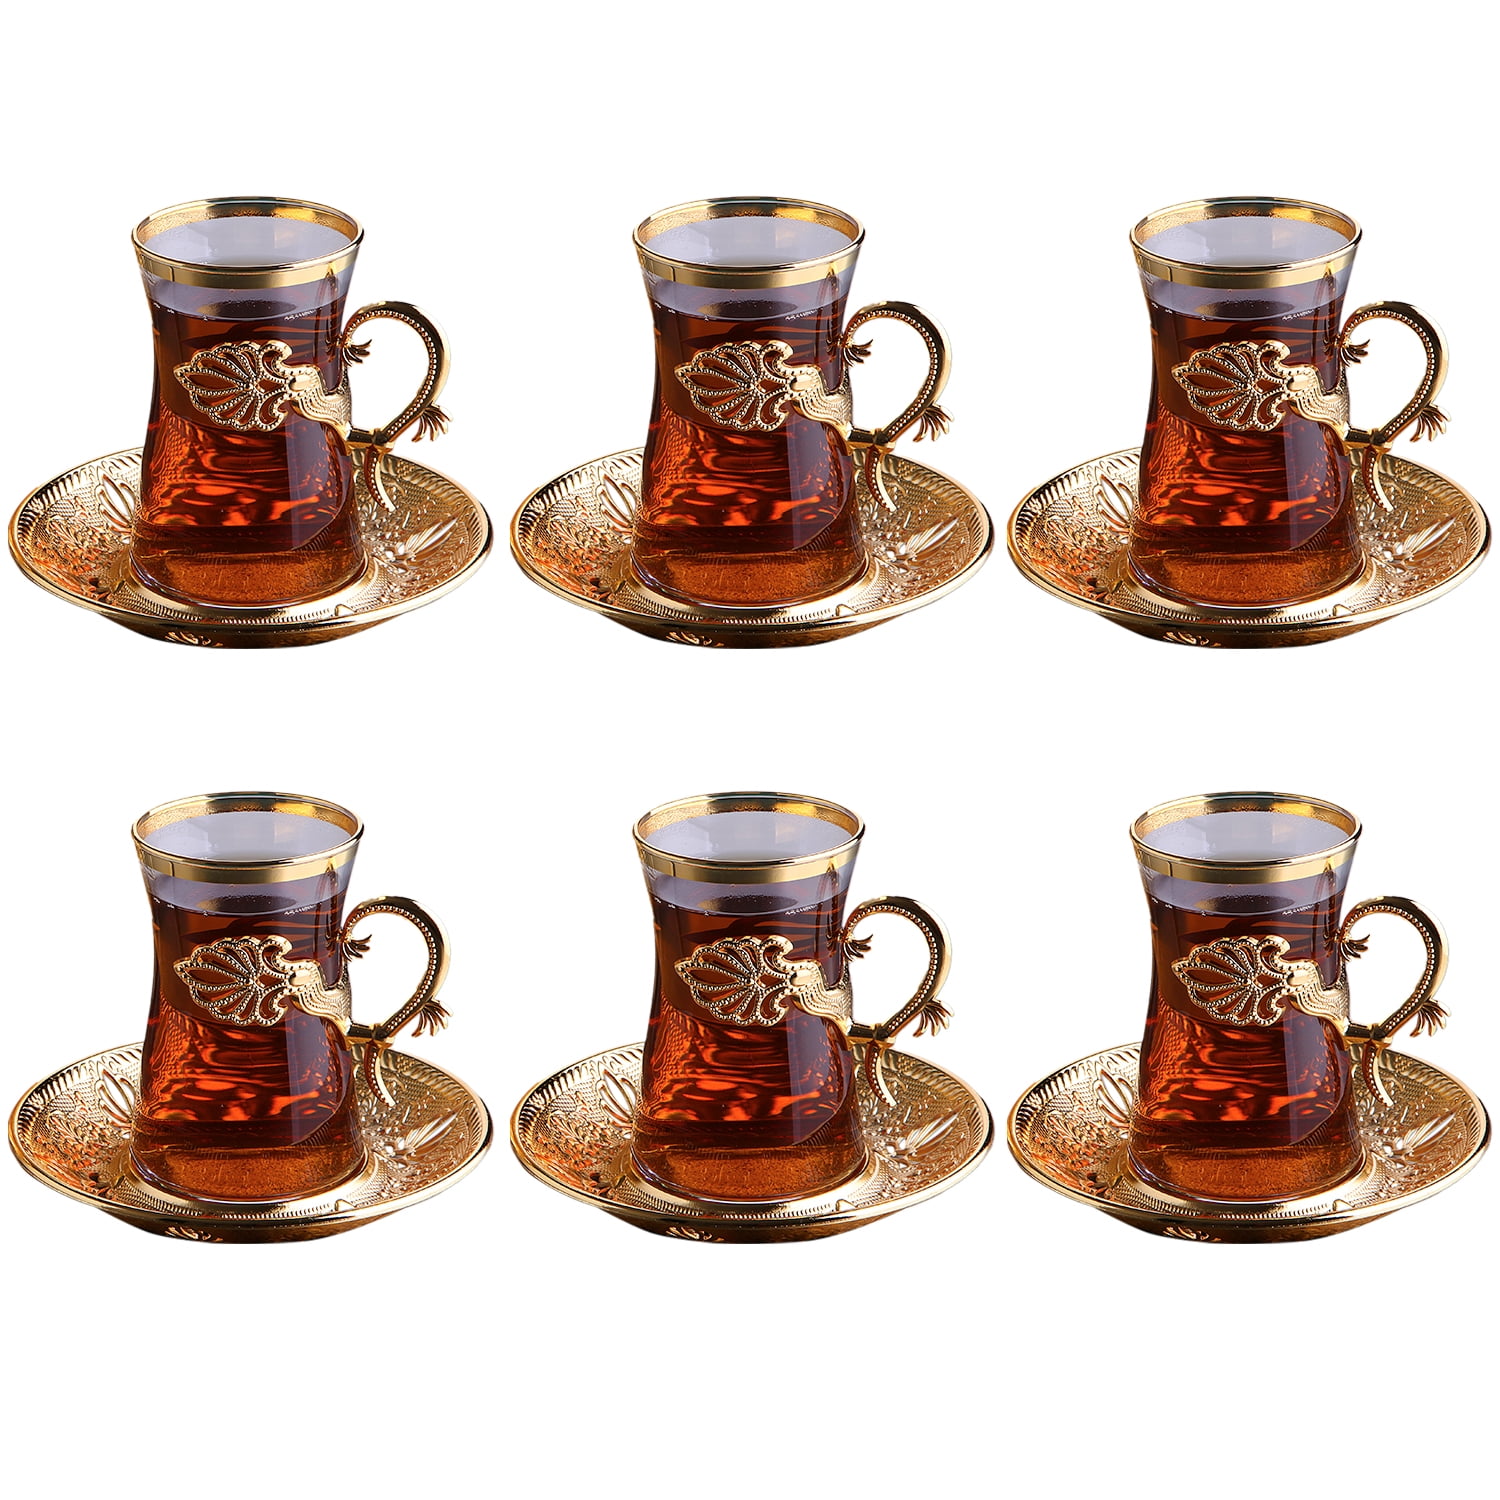 Crystalia Small Turkish Tea Set, Clear Glass Cups with Handle, 6